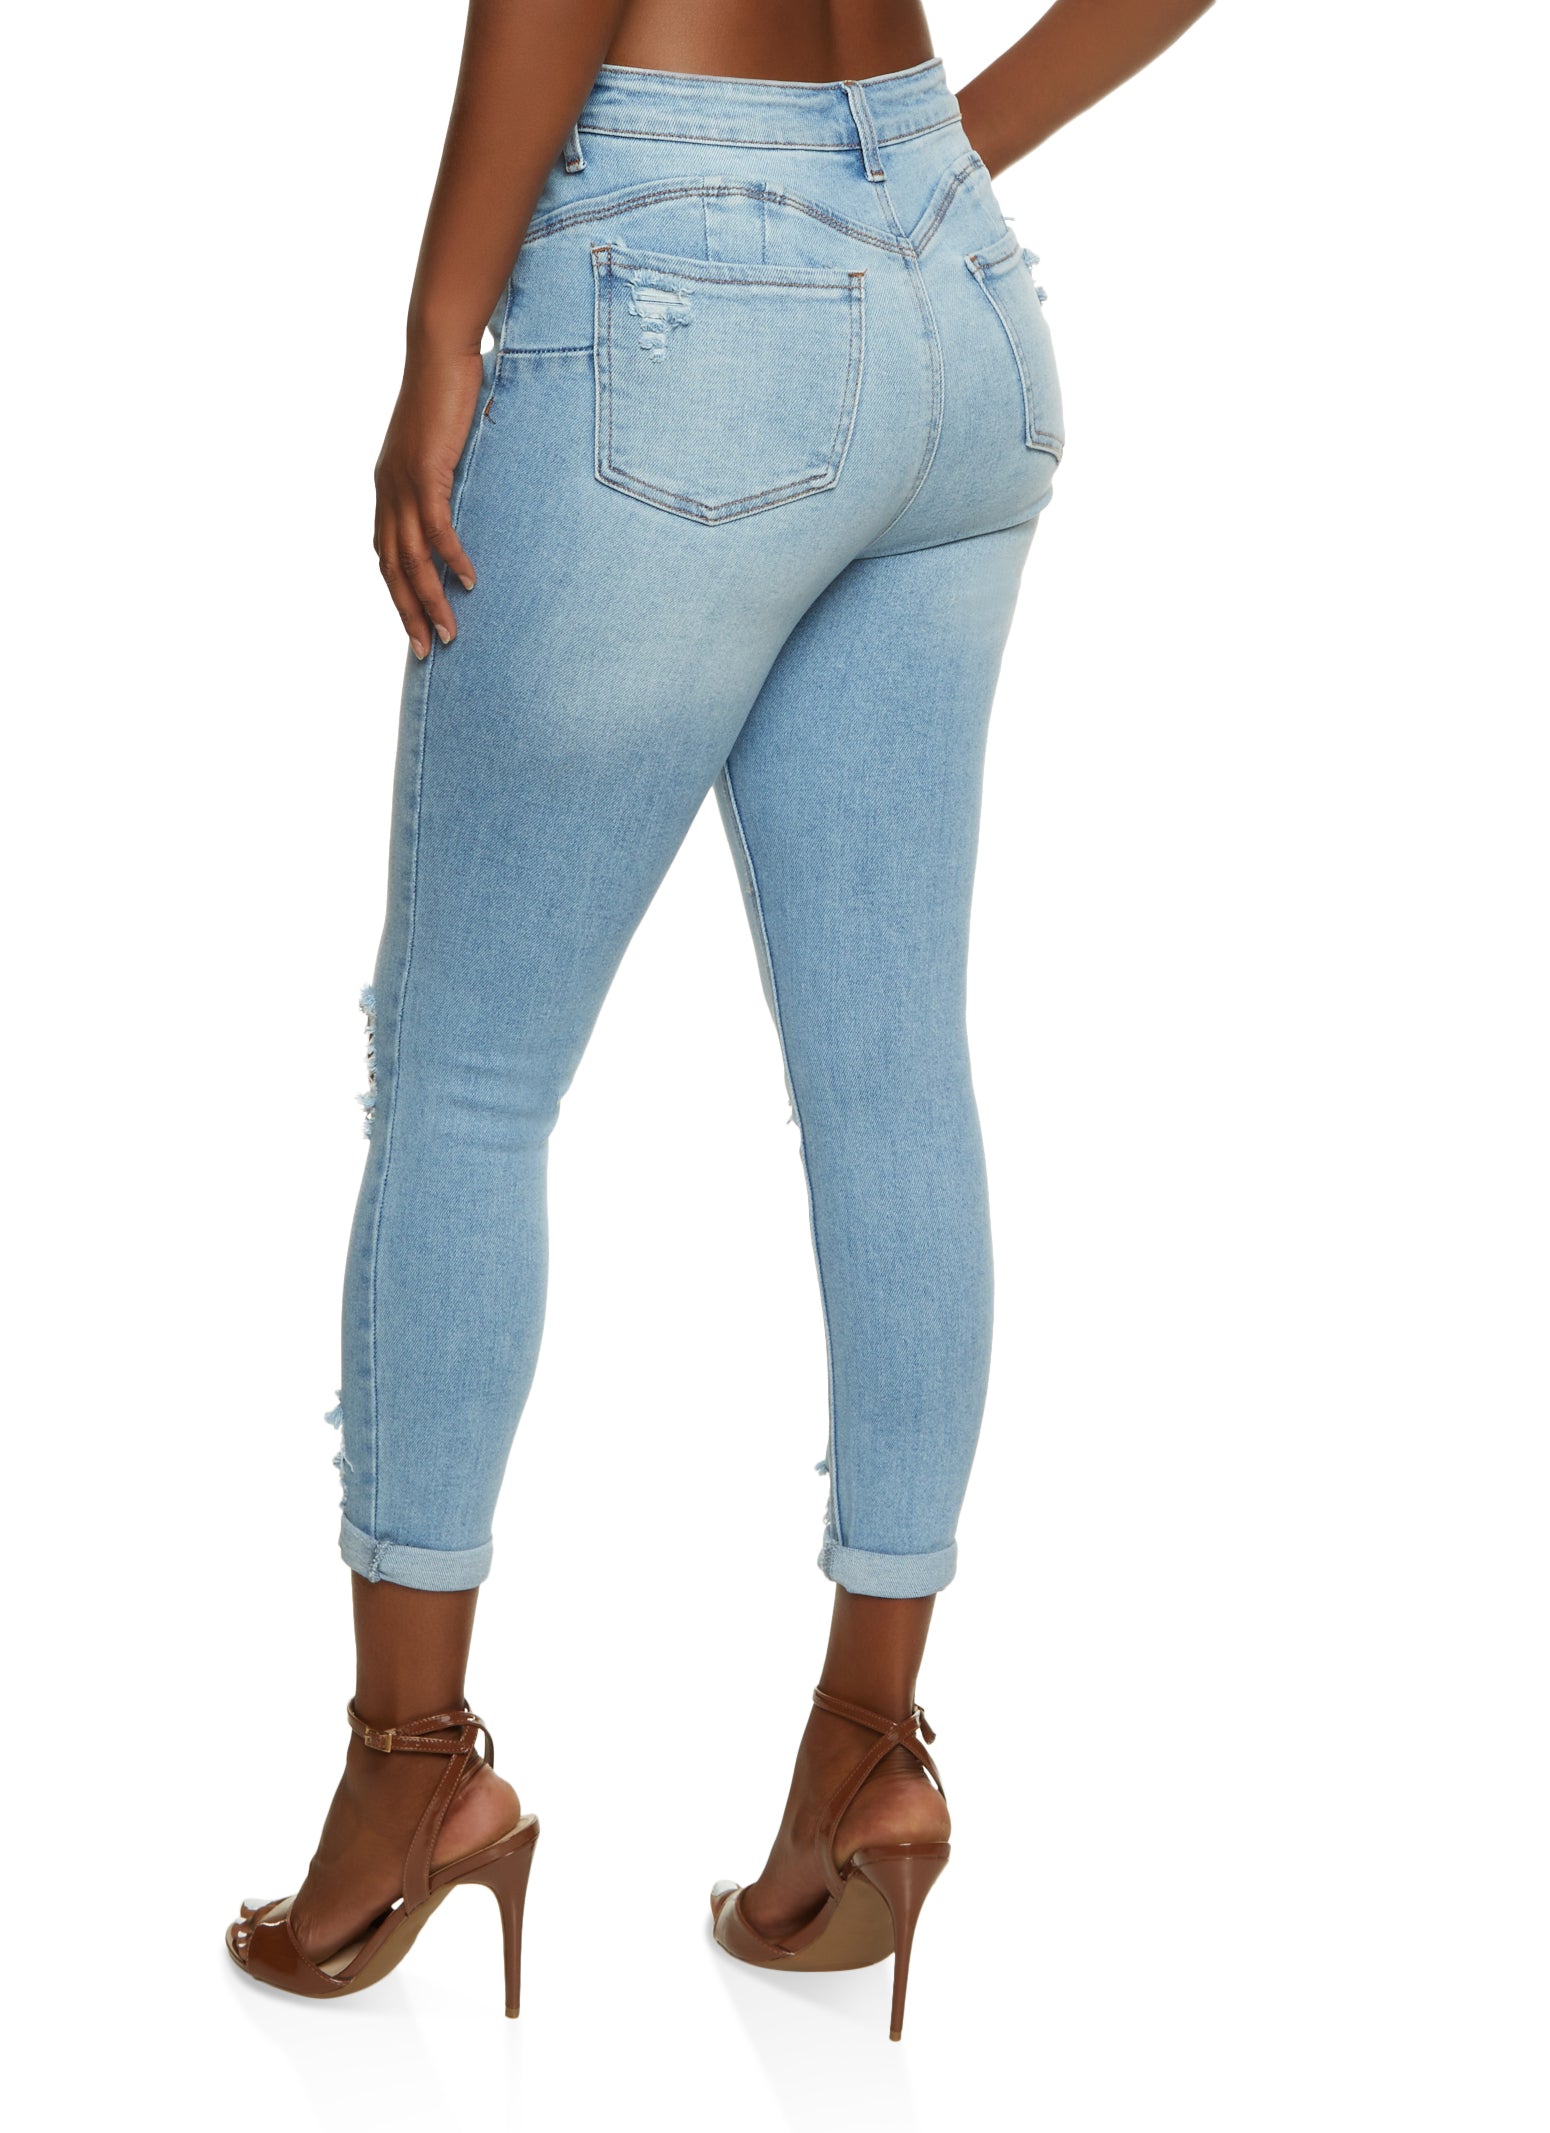 WAX Ripped Rolled Cuff Skinny Jeans - Light Wash